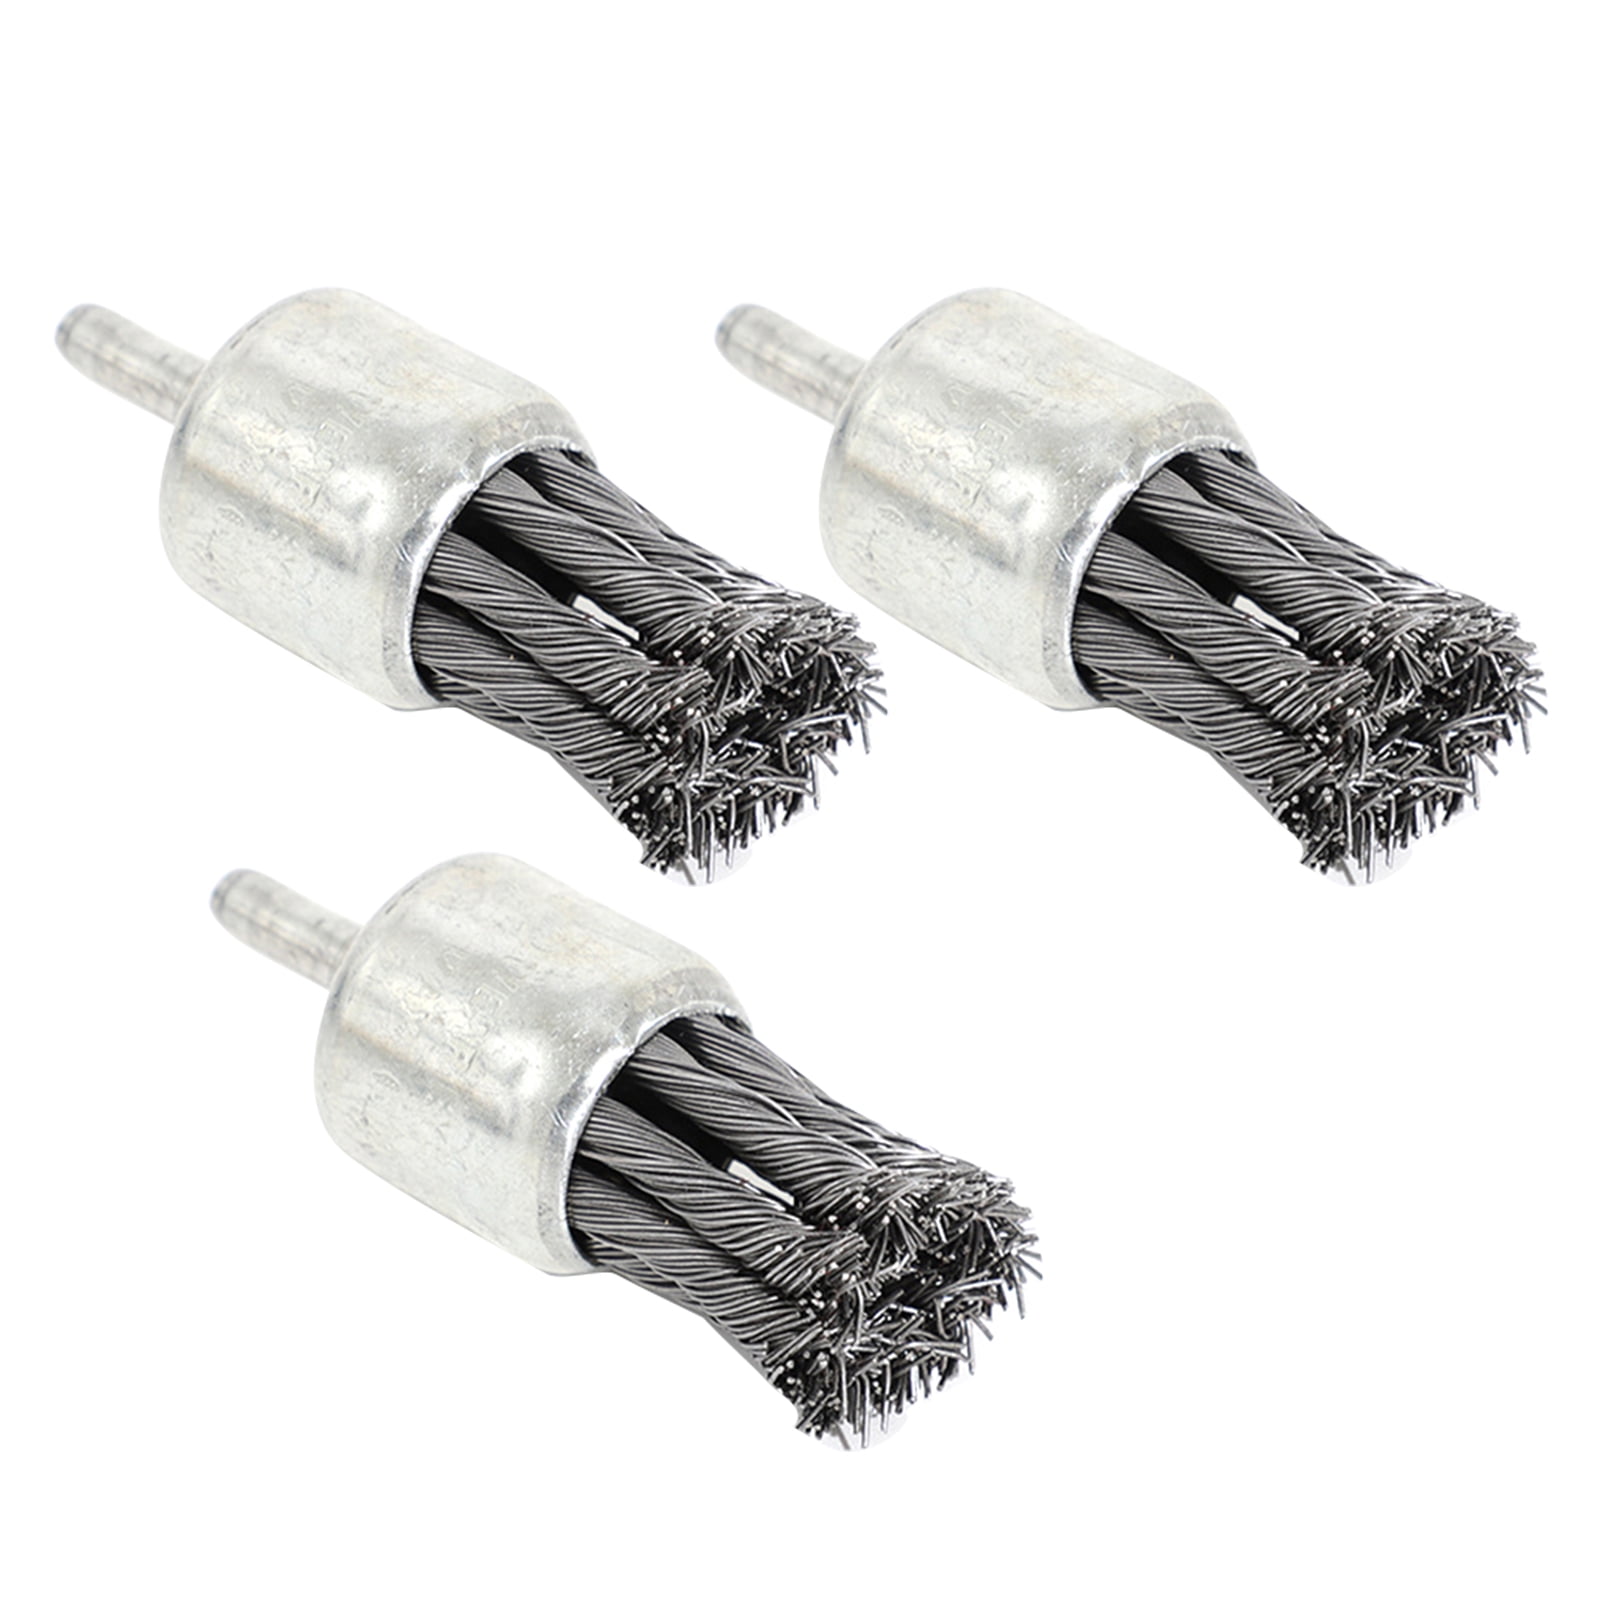 3PCS 3 Inch Knotted Wire Wheel Cup Brush and Twist End Brush Set,1/4" Shank for